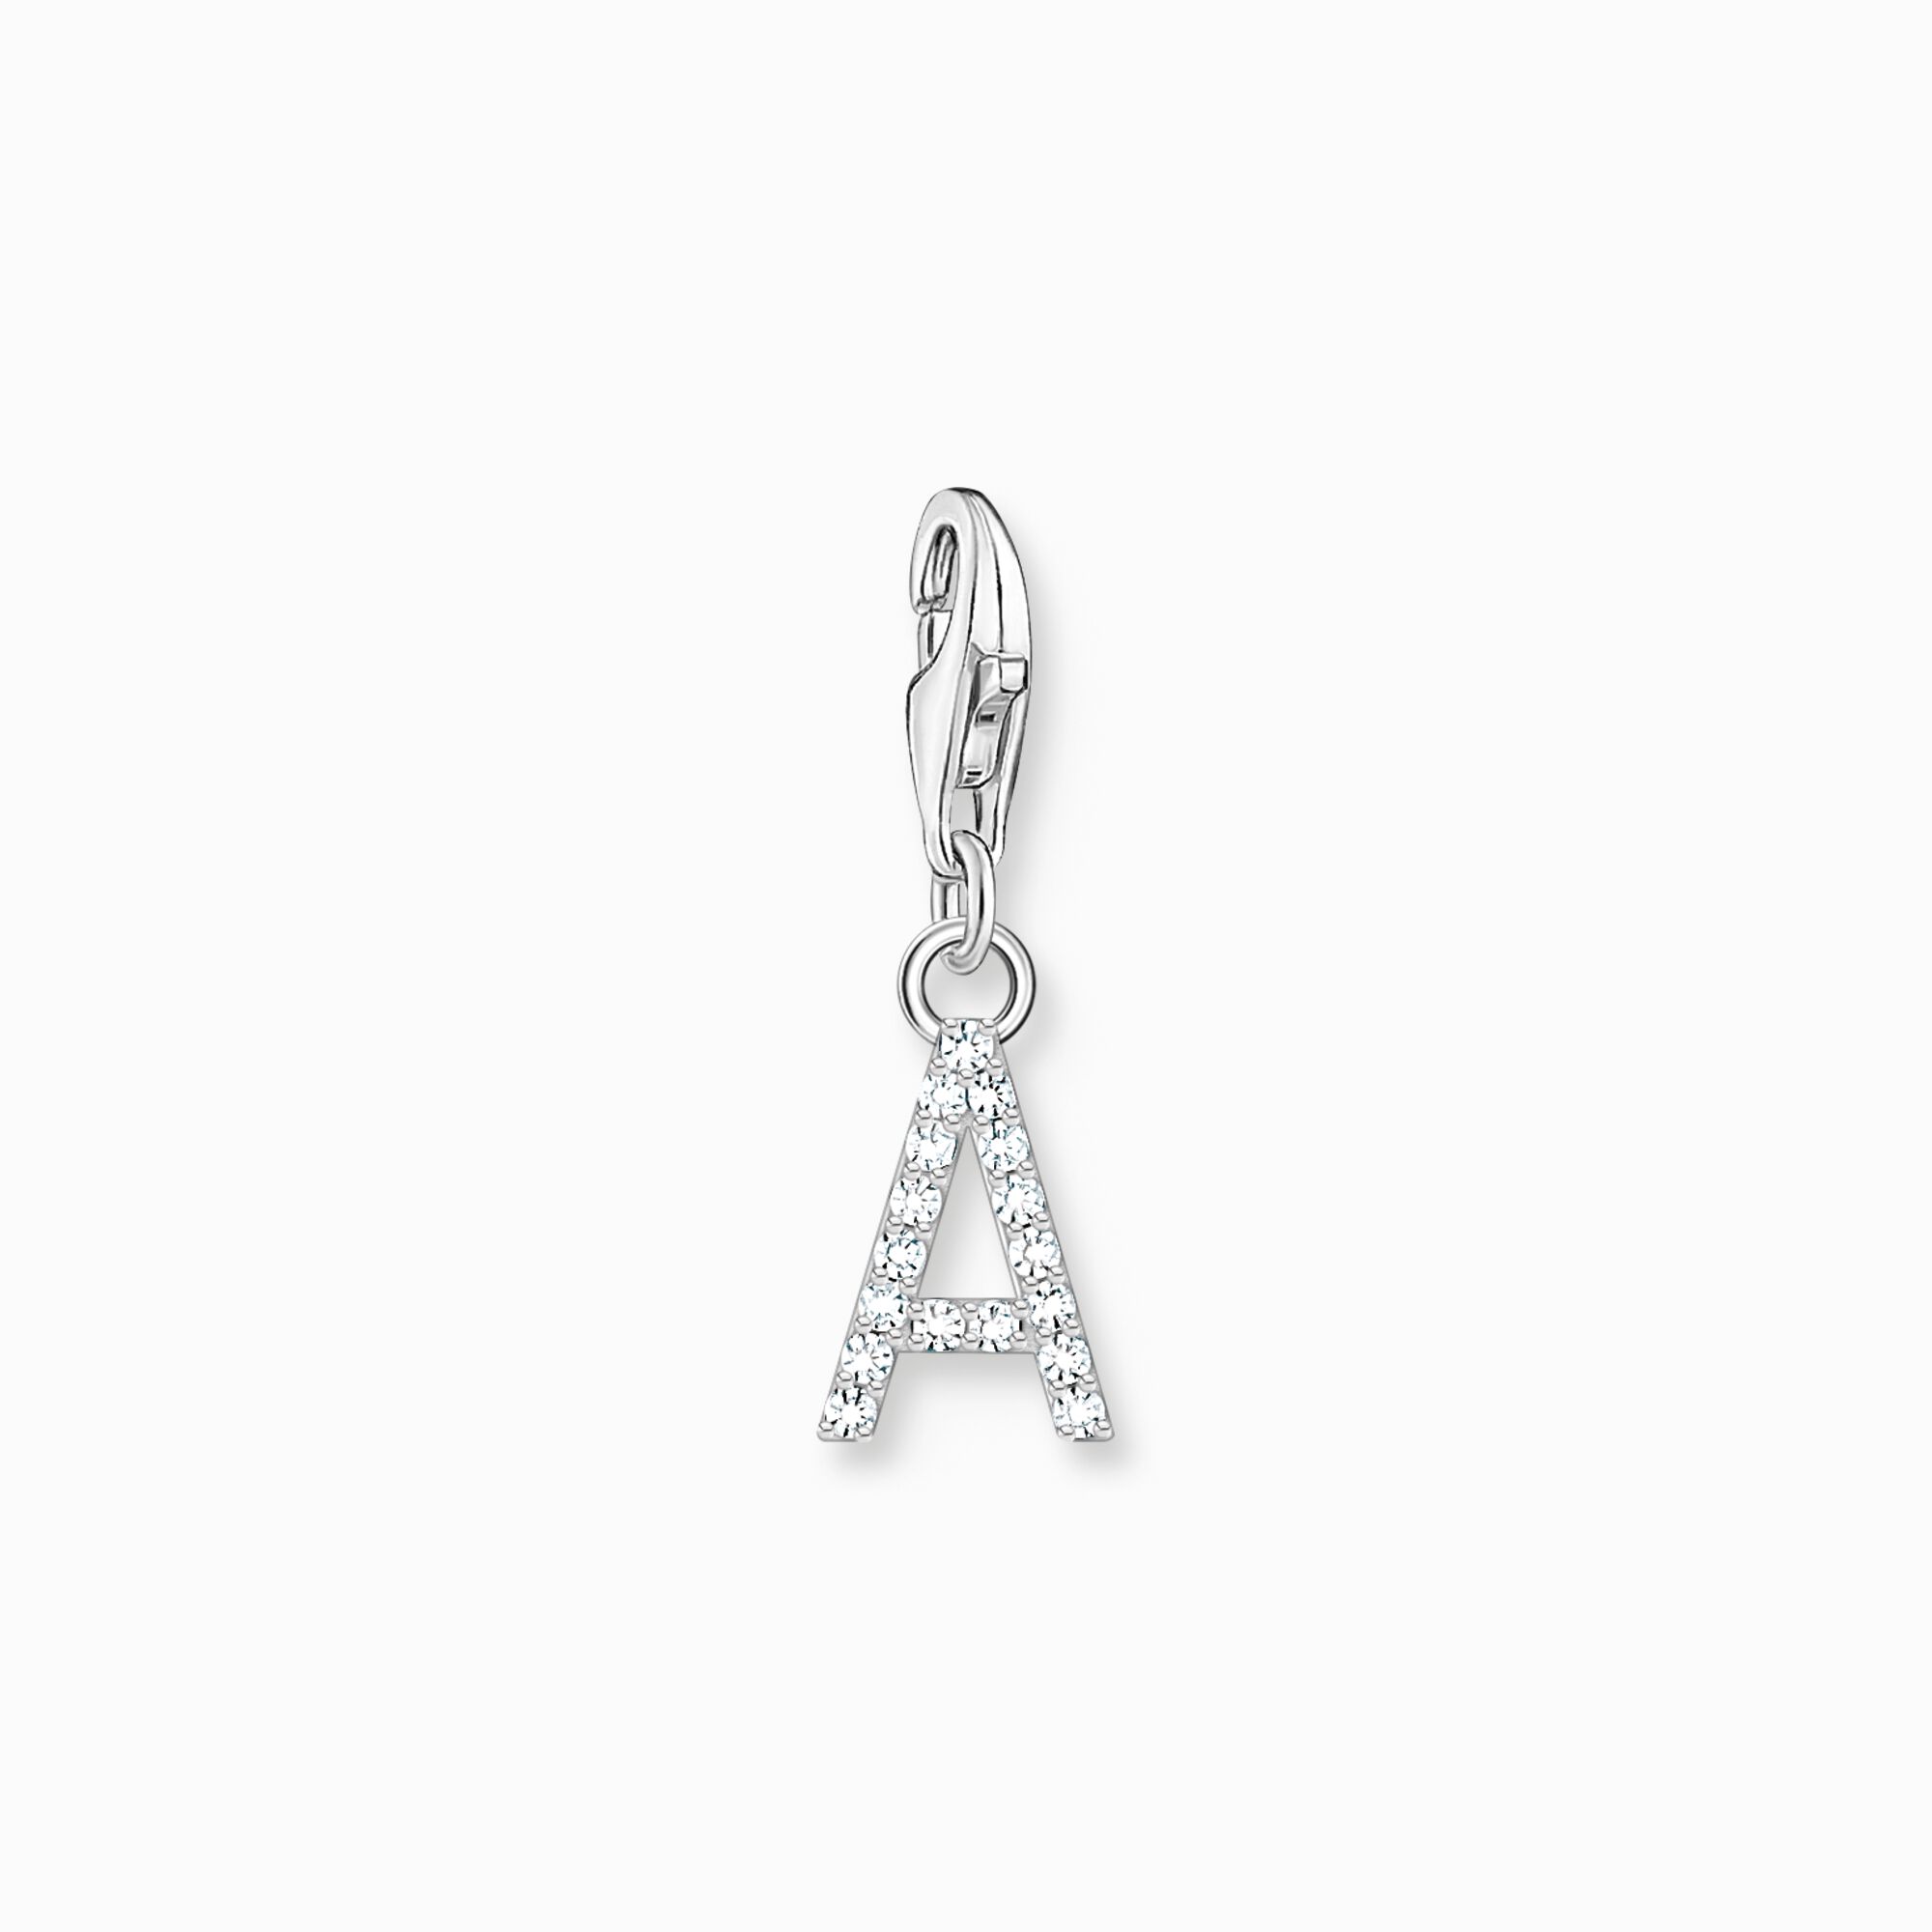 Charm pendant letter A with white stones silver from the Charm Club collection in the THOMAS SABO online store